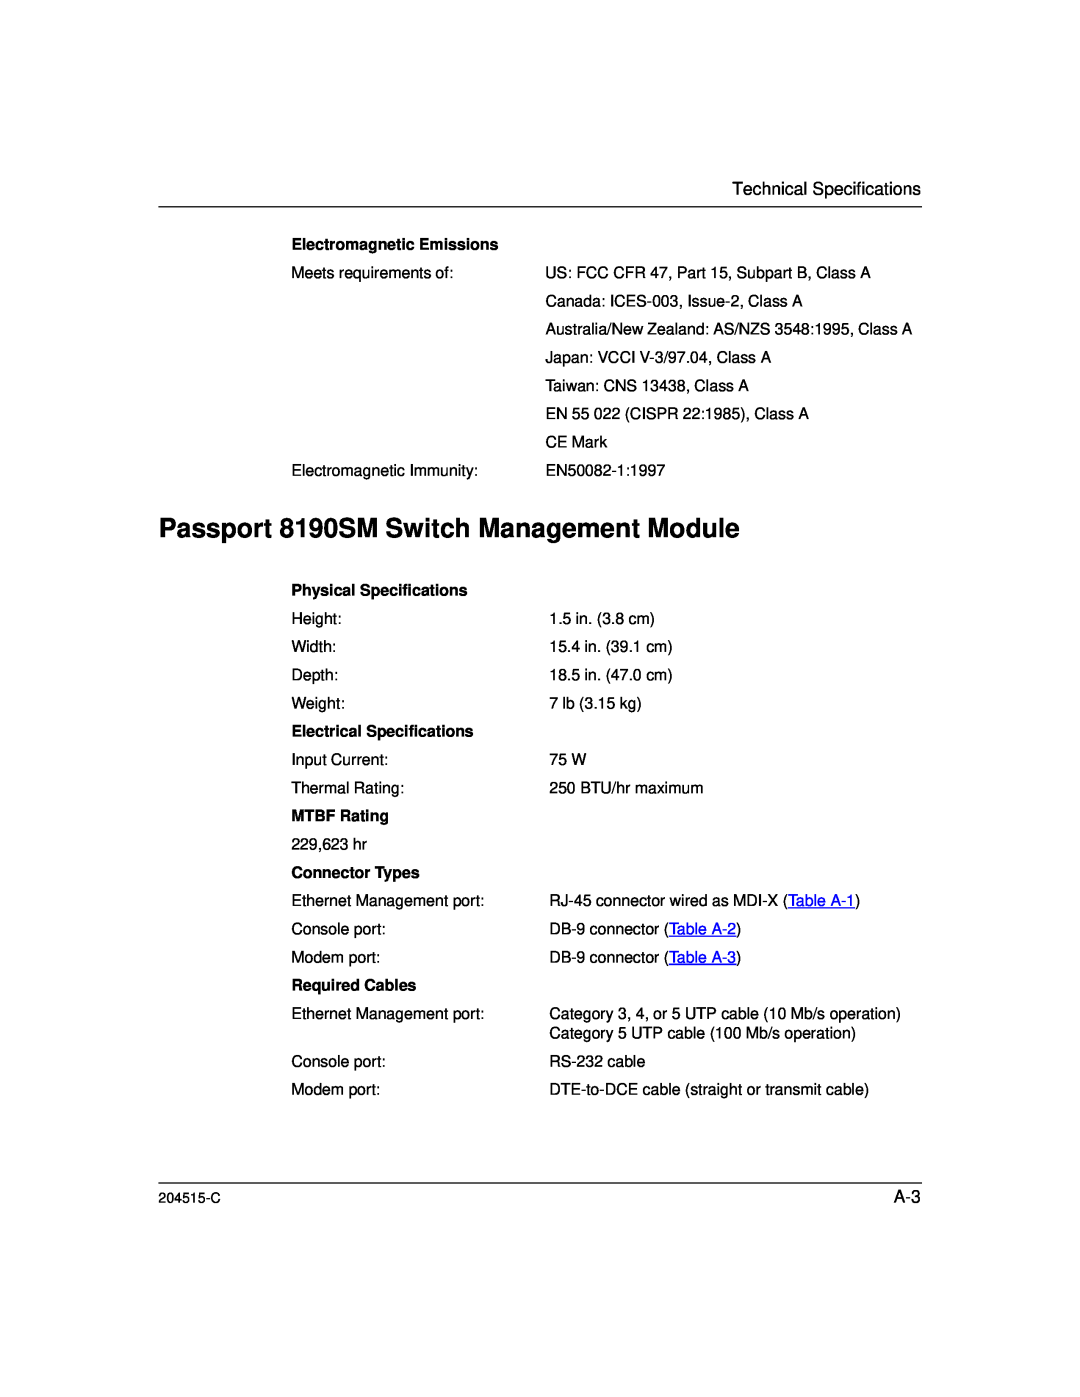 Nortel Networks 1000BASE-XD Passport 8190SM Switch Management Module, Technical Specifications, Electromagnetic Emissions 